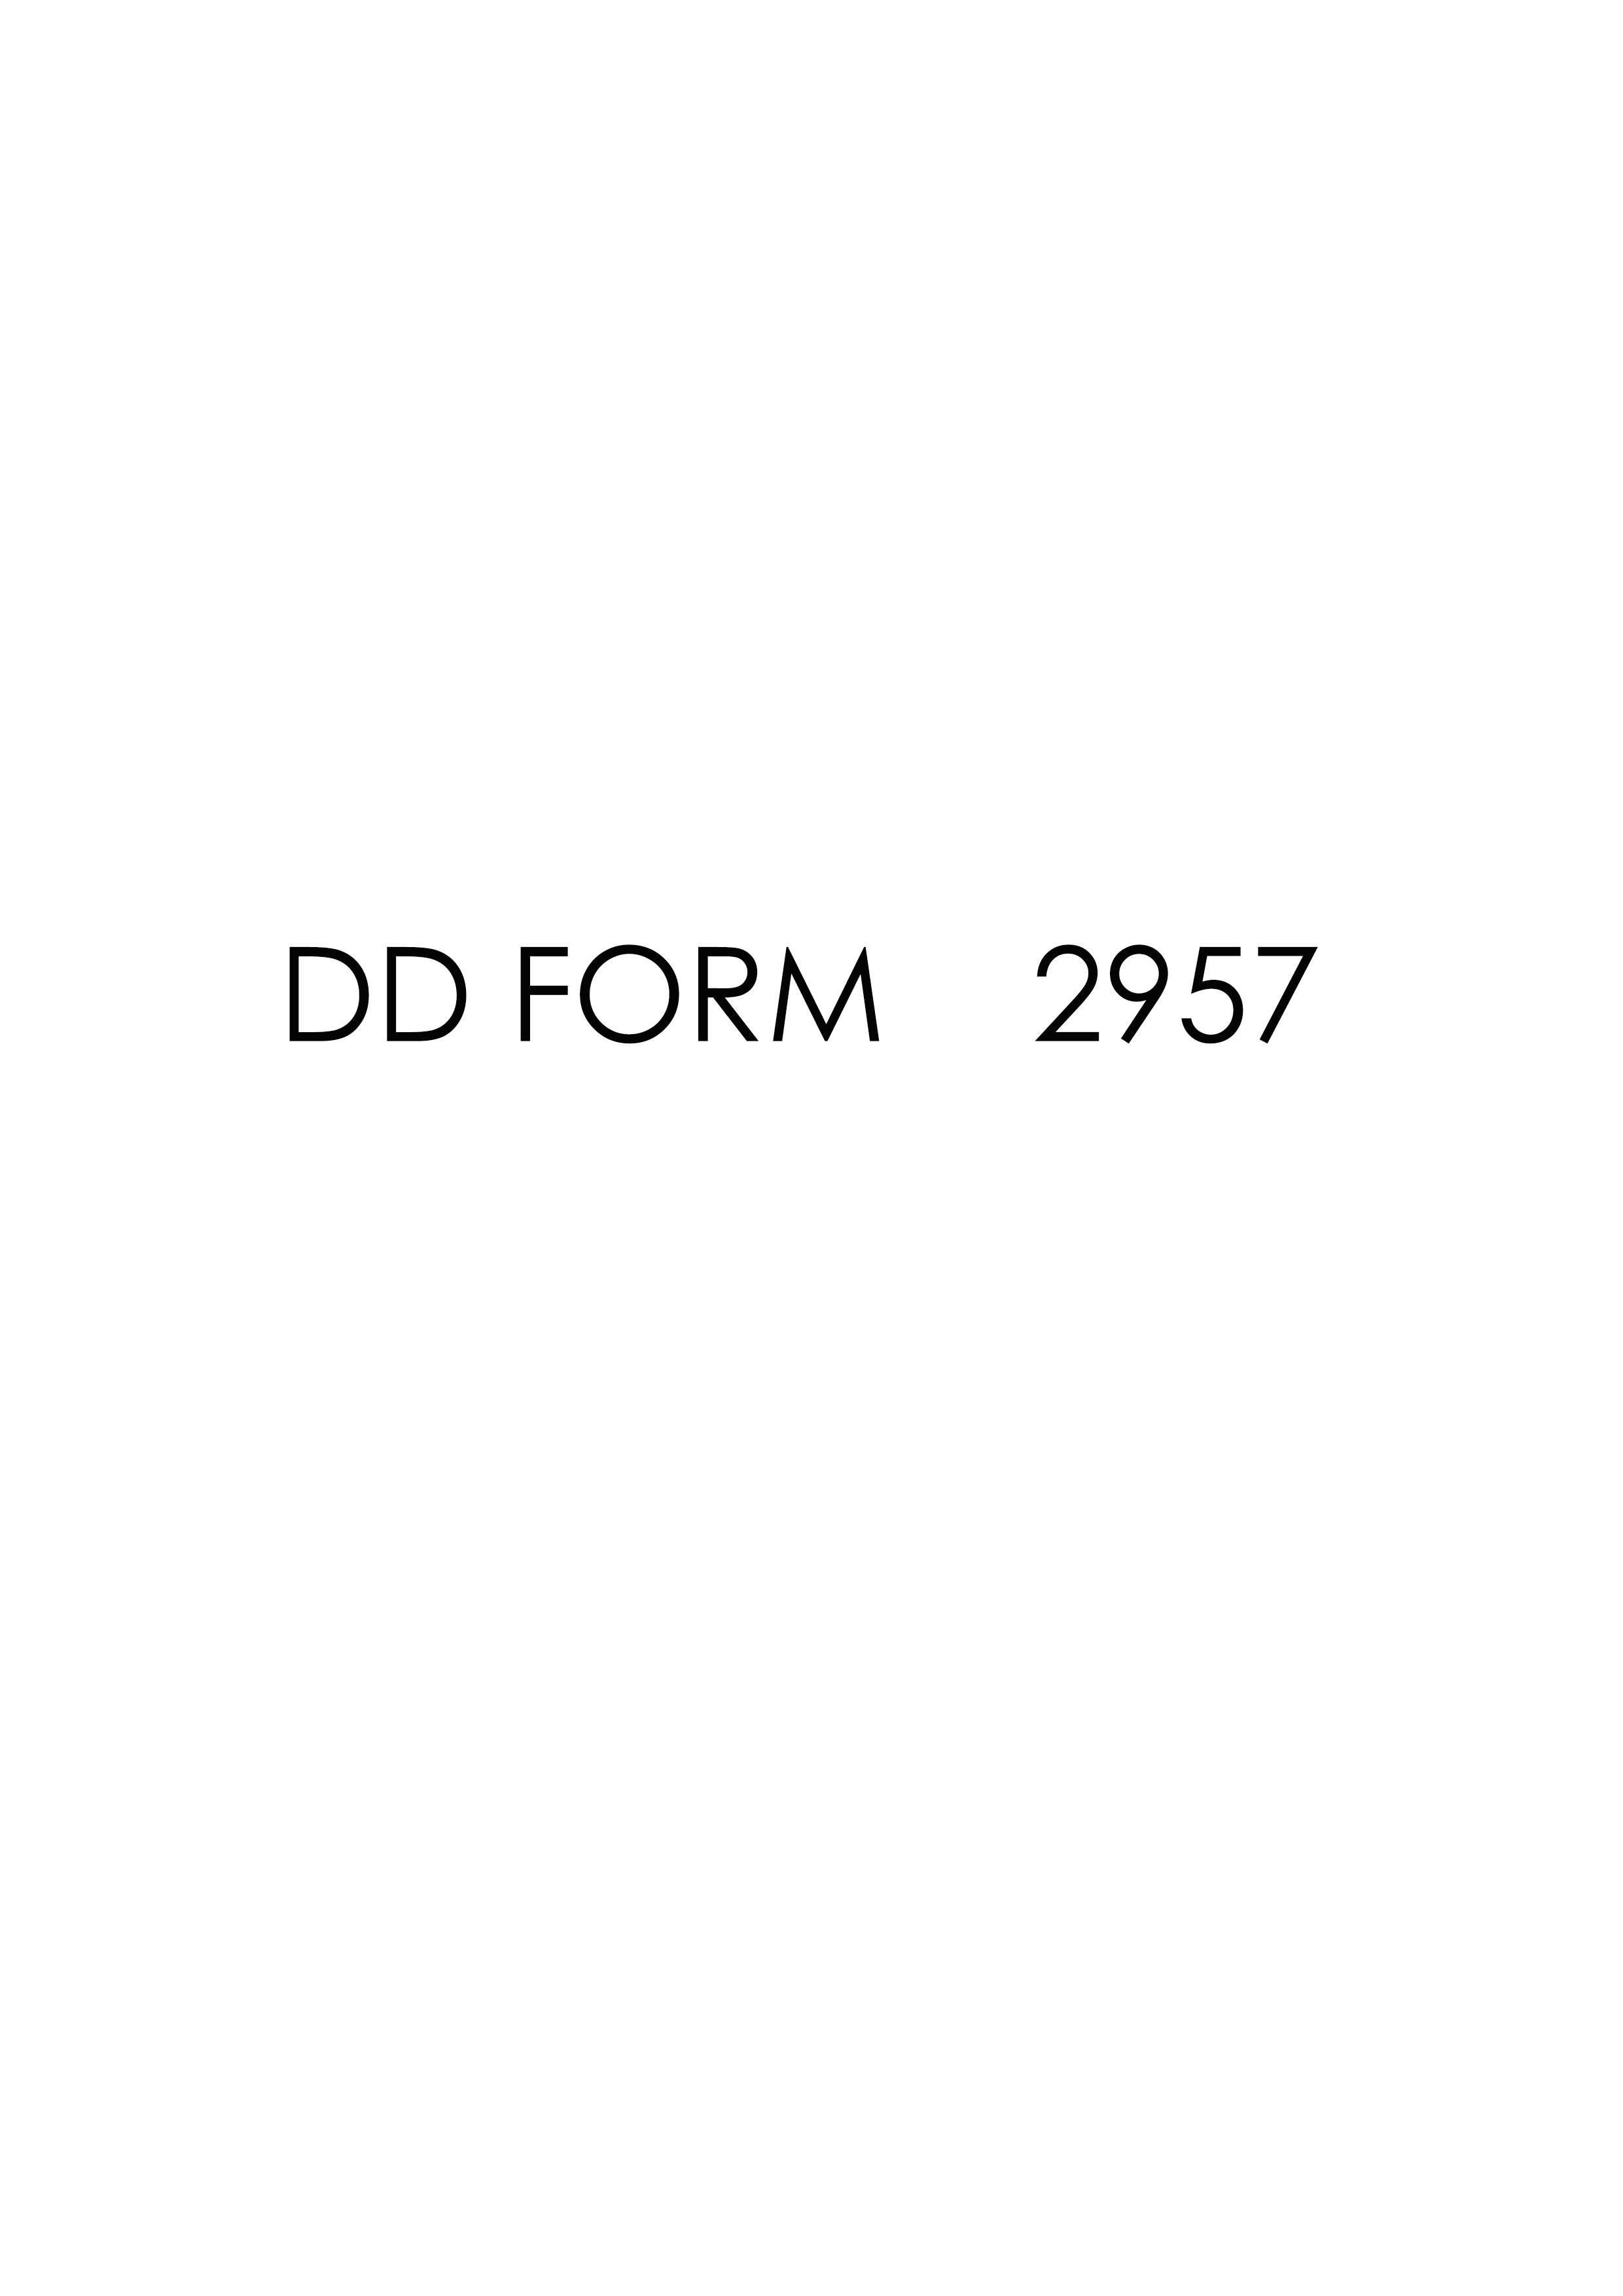 Download Fillable dd Form 2957